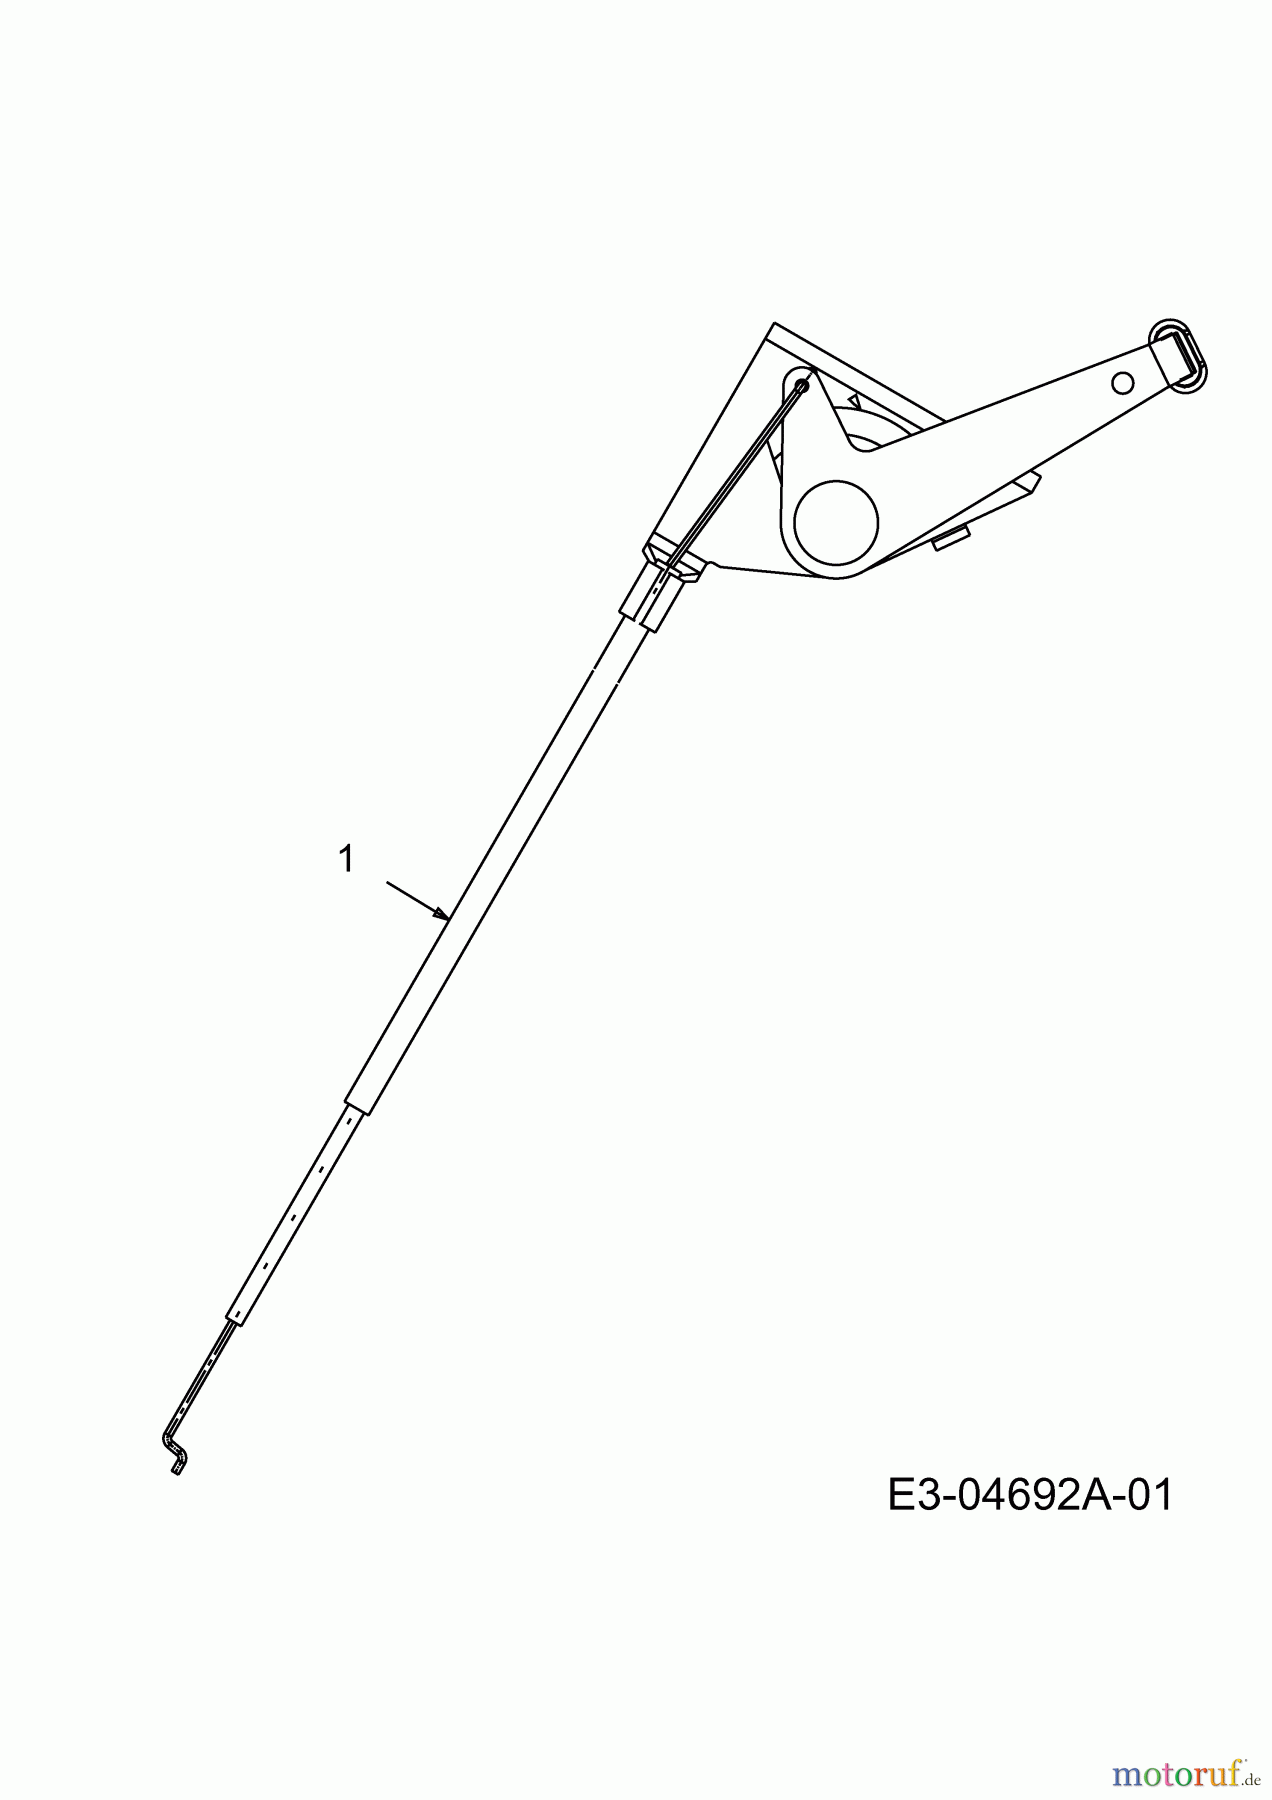  MTD Lawn tractors B 155 13AA688G678  (2004) Throttle cable